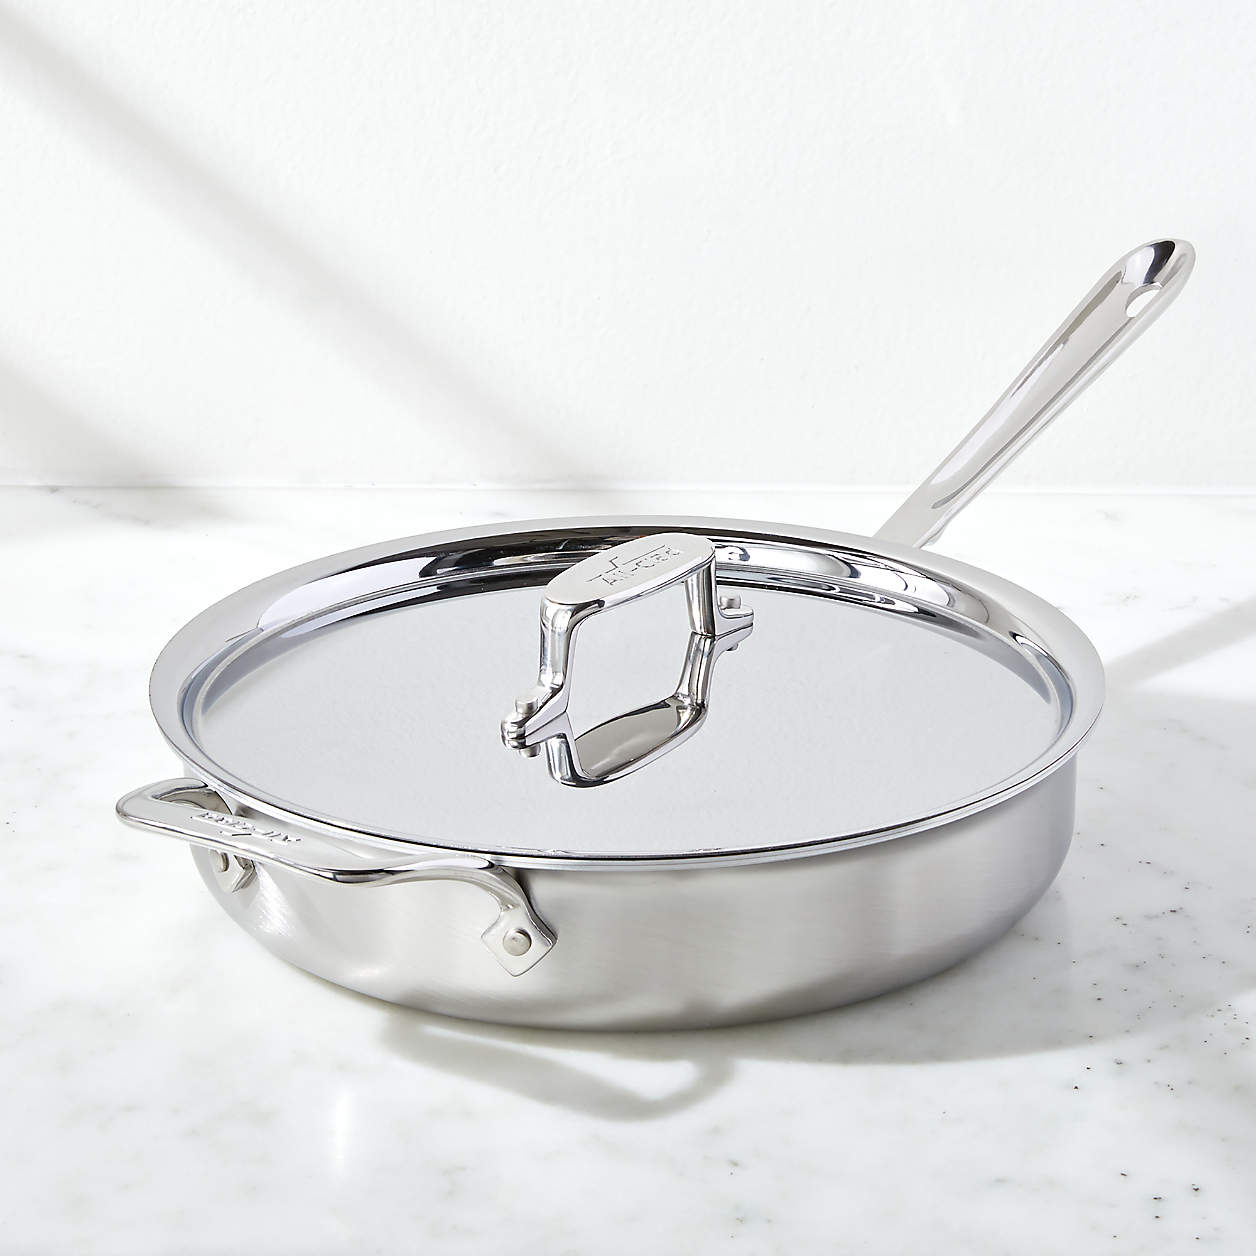 All-Clad d5 Brushed Stainless Steel 3-Quart Sauté Pan with Lid All Clad D5 Stainless Steel Saucepan 3 Qt